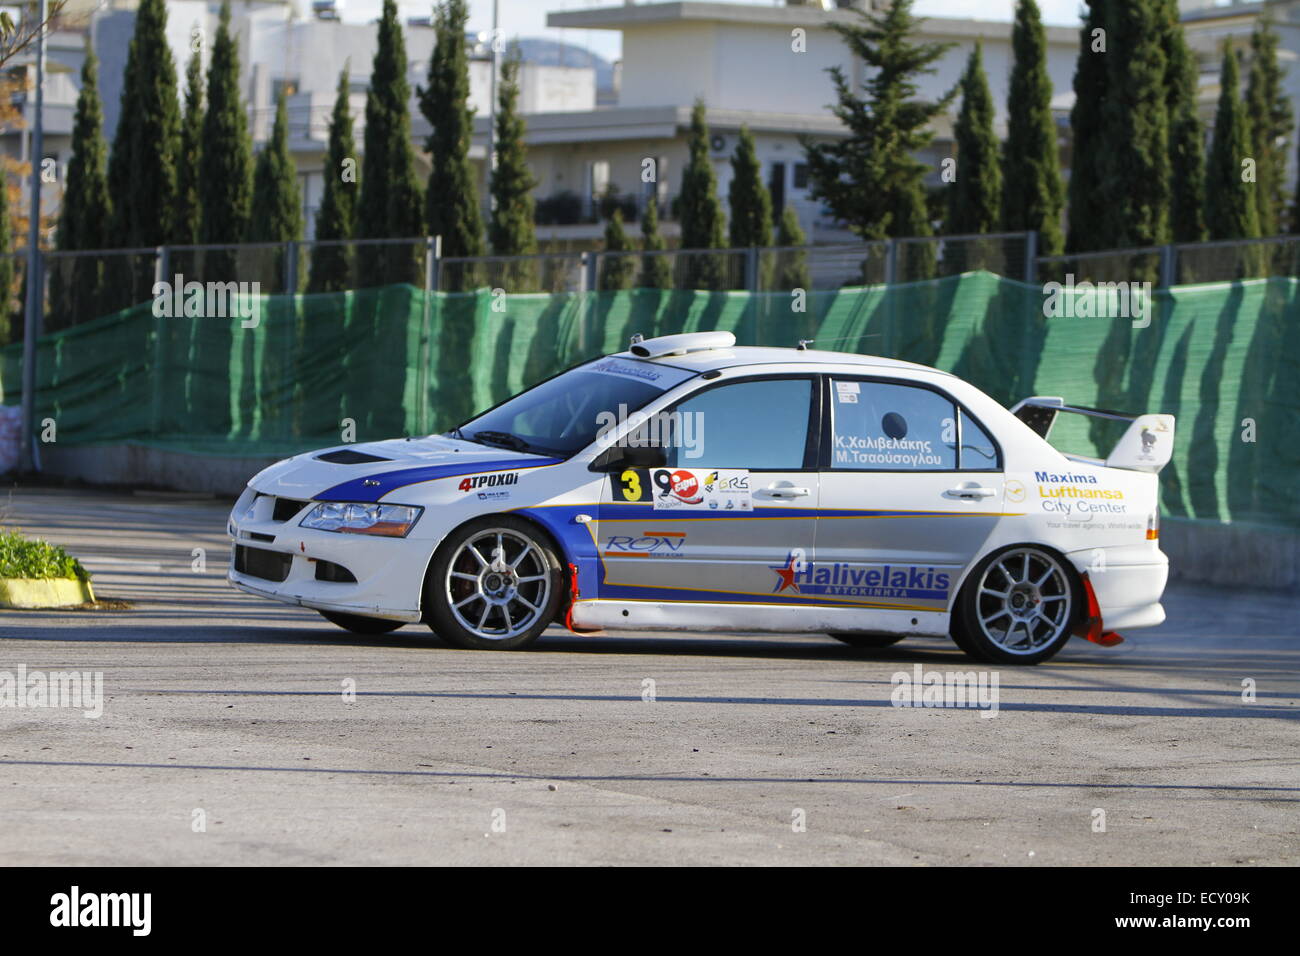 Athens, Greece. 21st Dec, 2014. Greek rally driver Konstantinos Chalivelakis and his co-driver Marios Tsaousoglou race in a Mitsubishi Evo 8 in the Golden Rally Show 2014. The first Golden Rally Show was held in the Athens Olympic Sports Complex. The race is a continuation of the 'Nino Memorial race' that was held annually in remembrance of Greek driver Nino Samaropoulou. © Michael Debets/Pacific Press/Alamy Live News Stock Photo